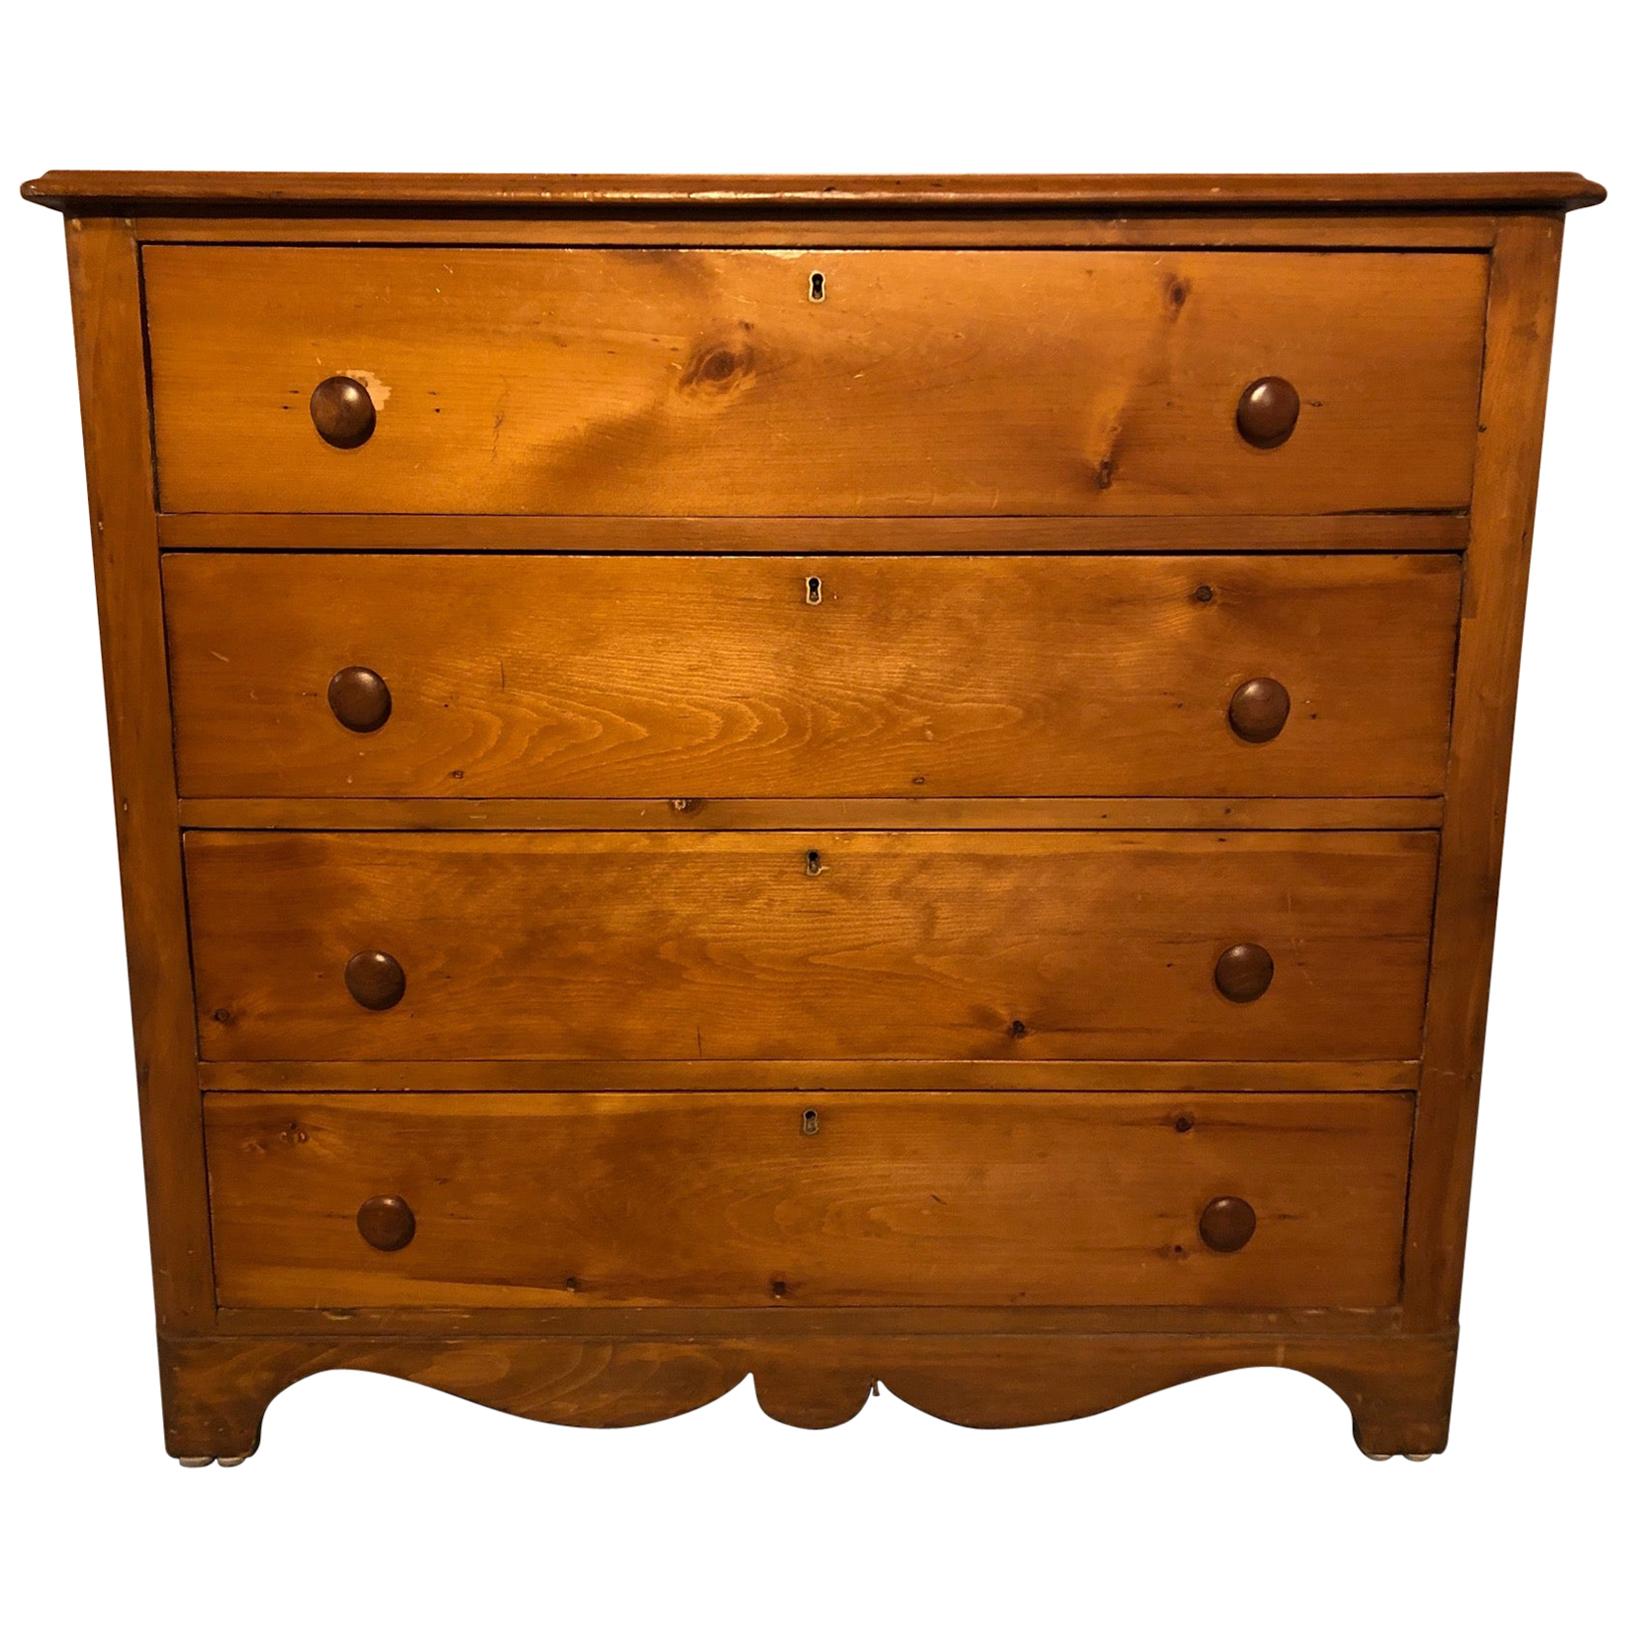 19th Century Natural Pine Dresser Chest of Drawers